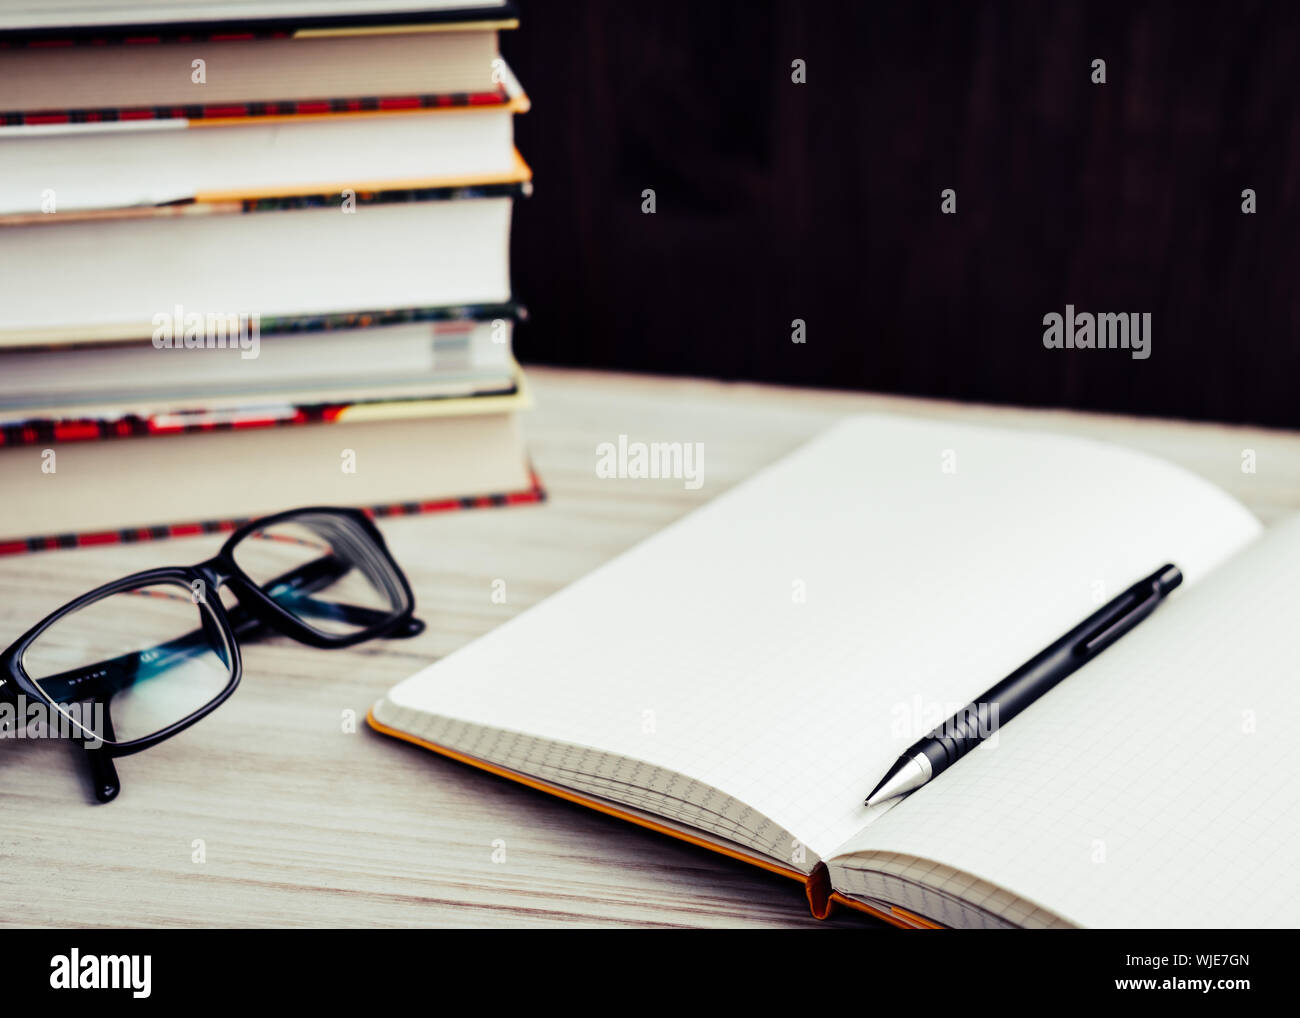 Open Book With Pen On Table Stock Photo - Alamy